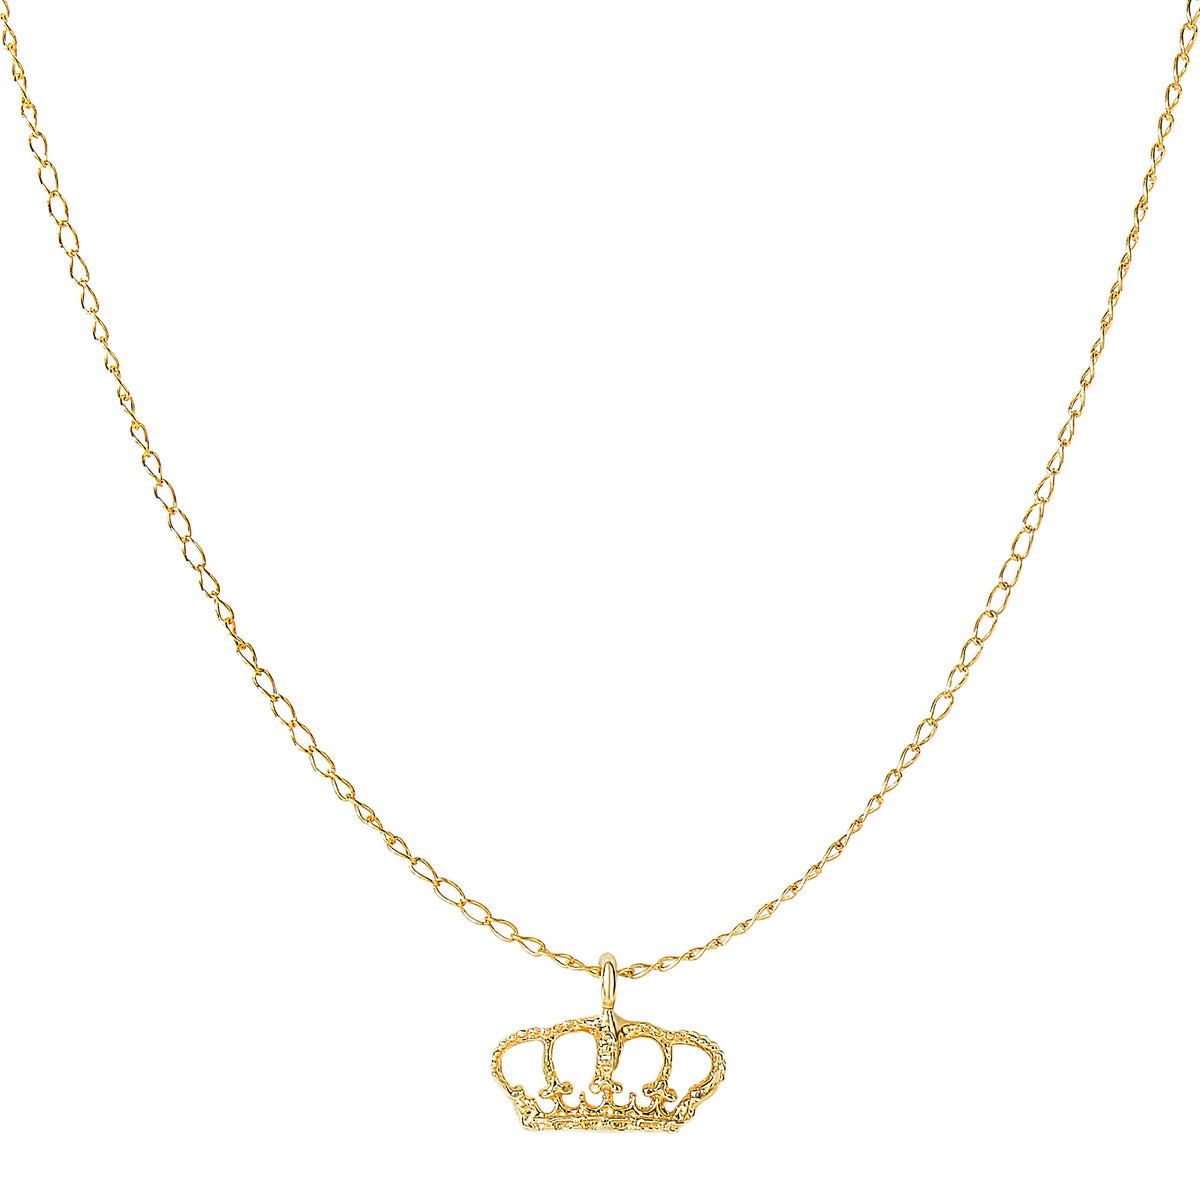 14k Yellow Gold Shiny Crown Pendant Necklace, 18"